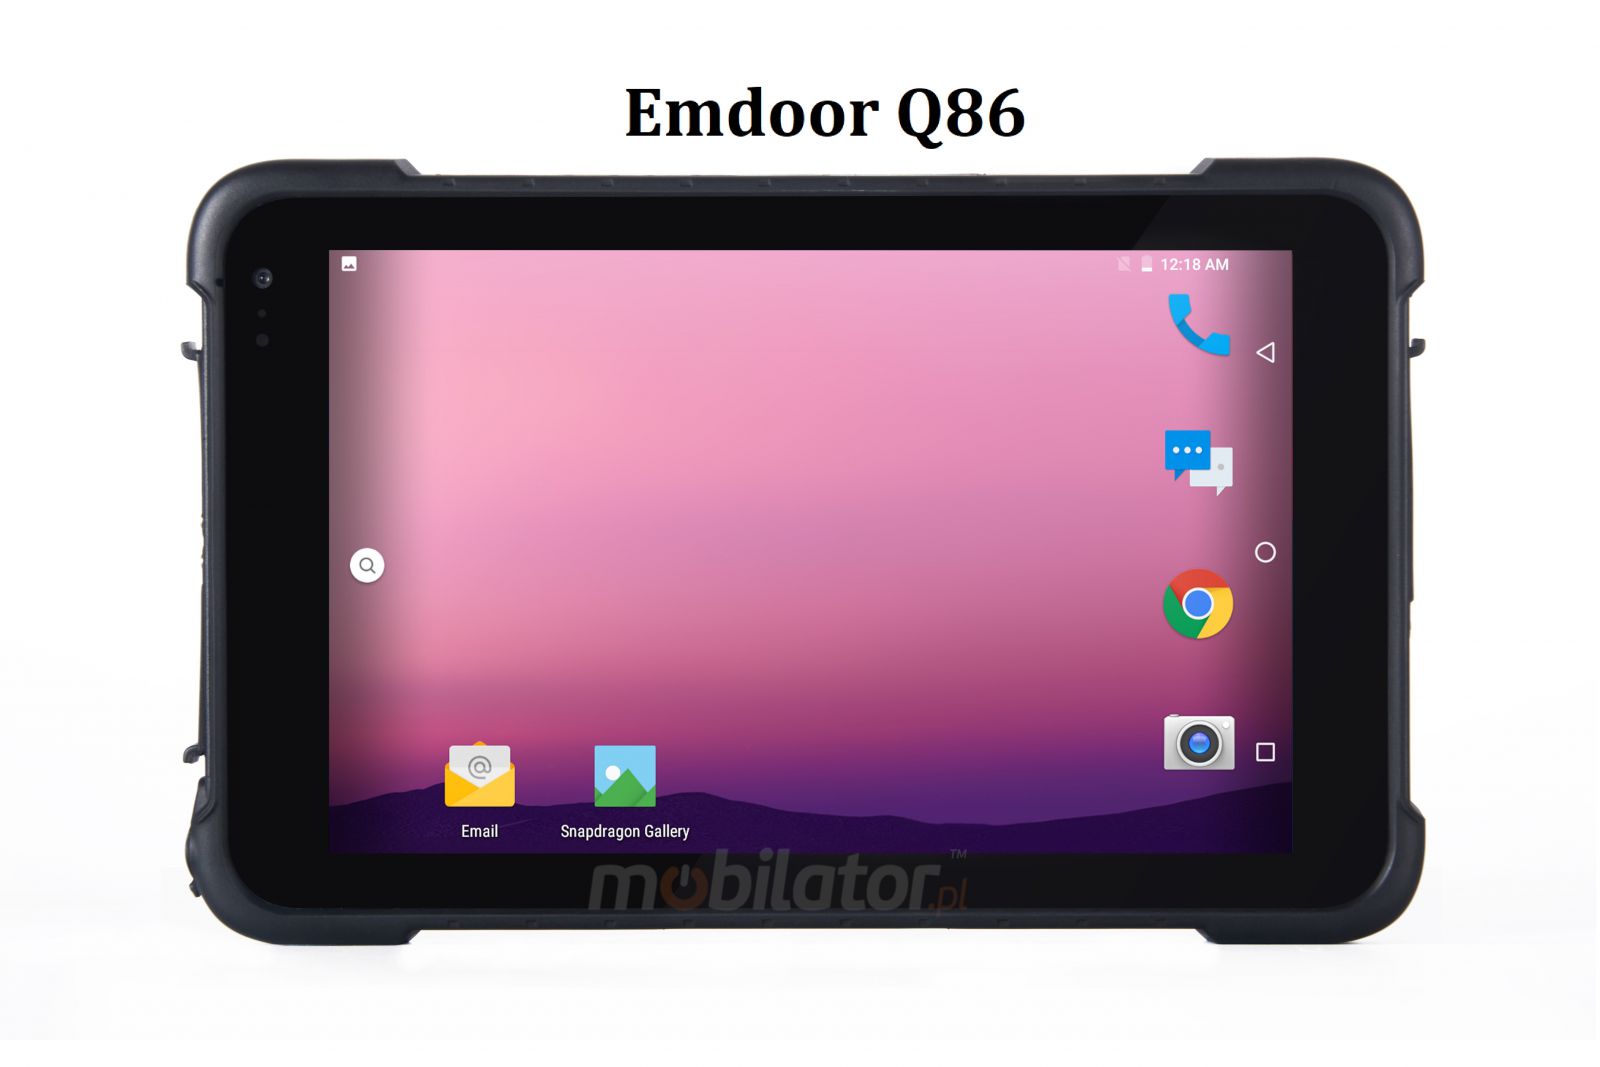 Emdoor Q86 v.6 - rugged industrial tablet, IP67 and 1D MOTO code reader, efficient battery and MSM processor, 800 nits screen and 4GB RAM 